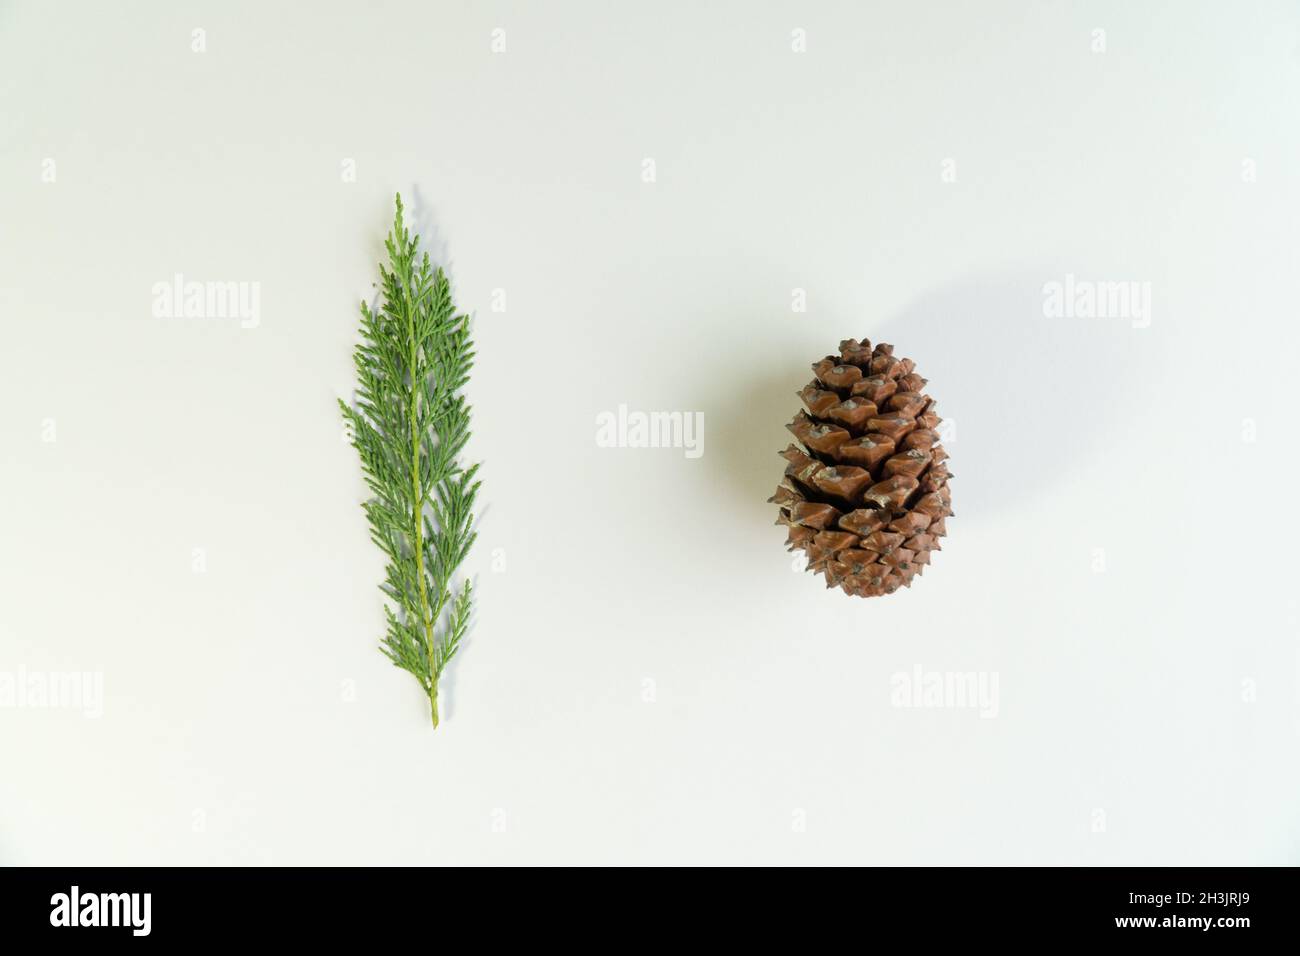 Noel tree leaf and pine cone top view christmas concept idea photo on white background Stock Photo